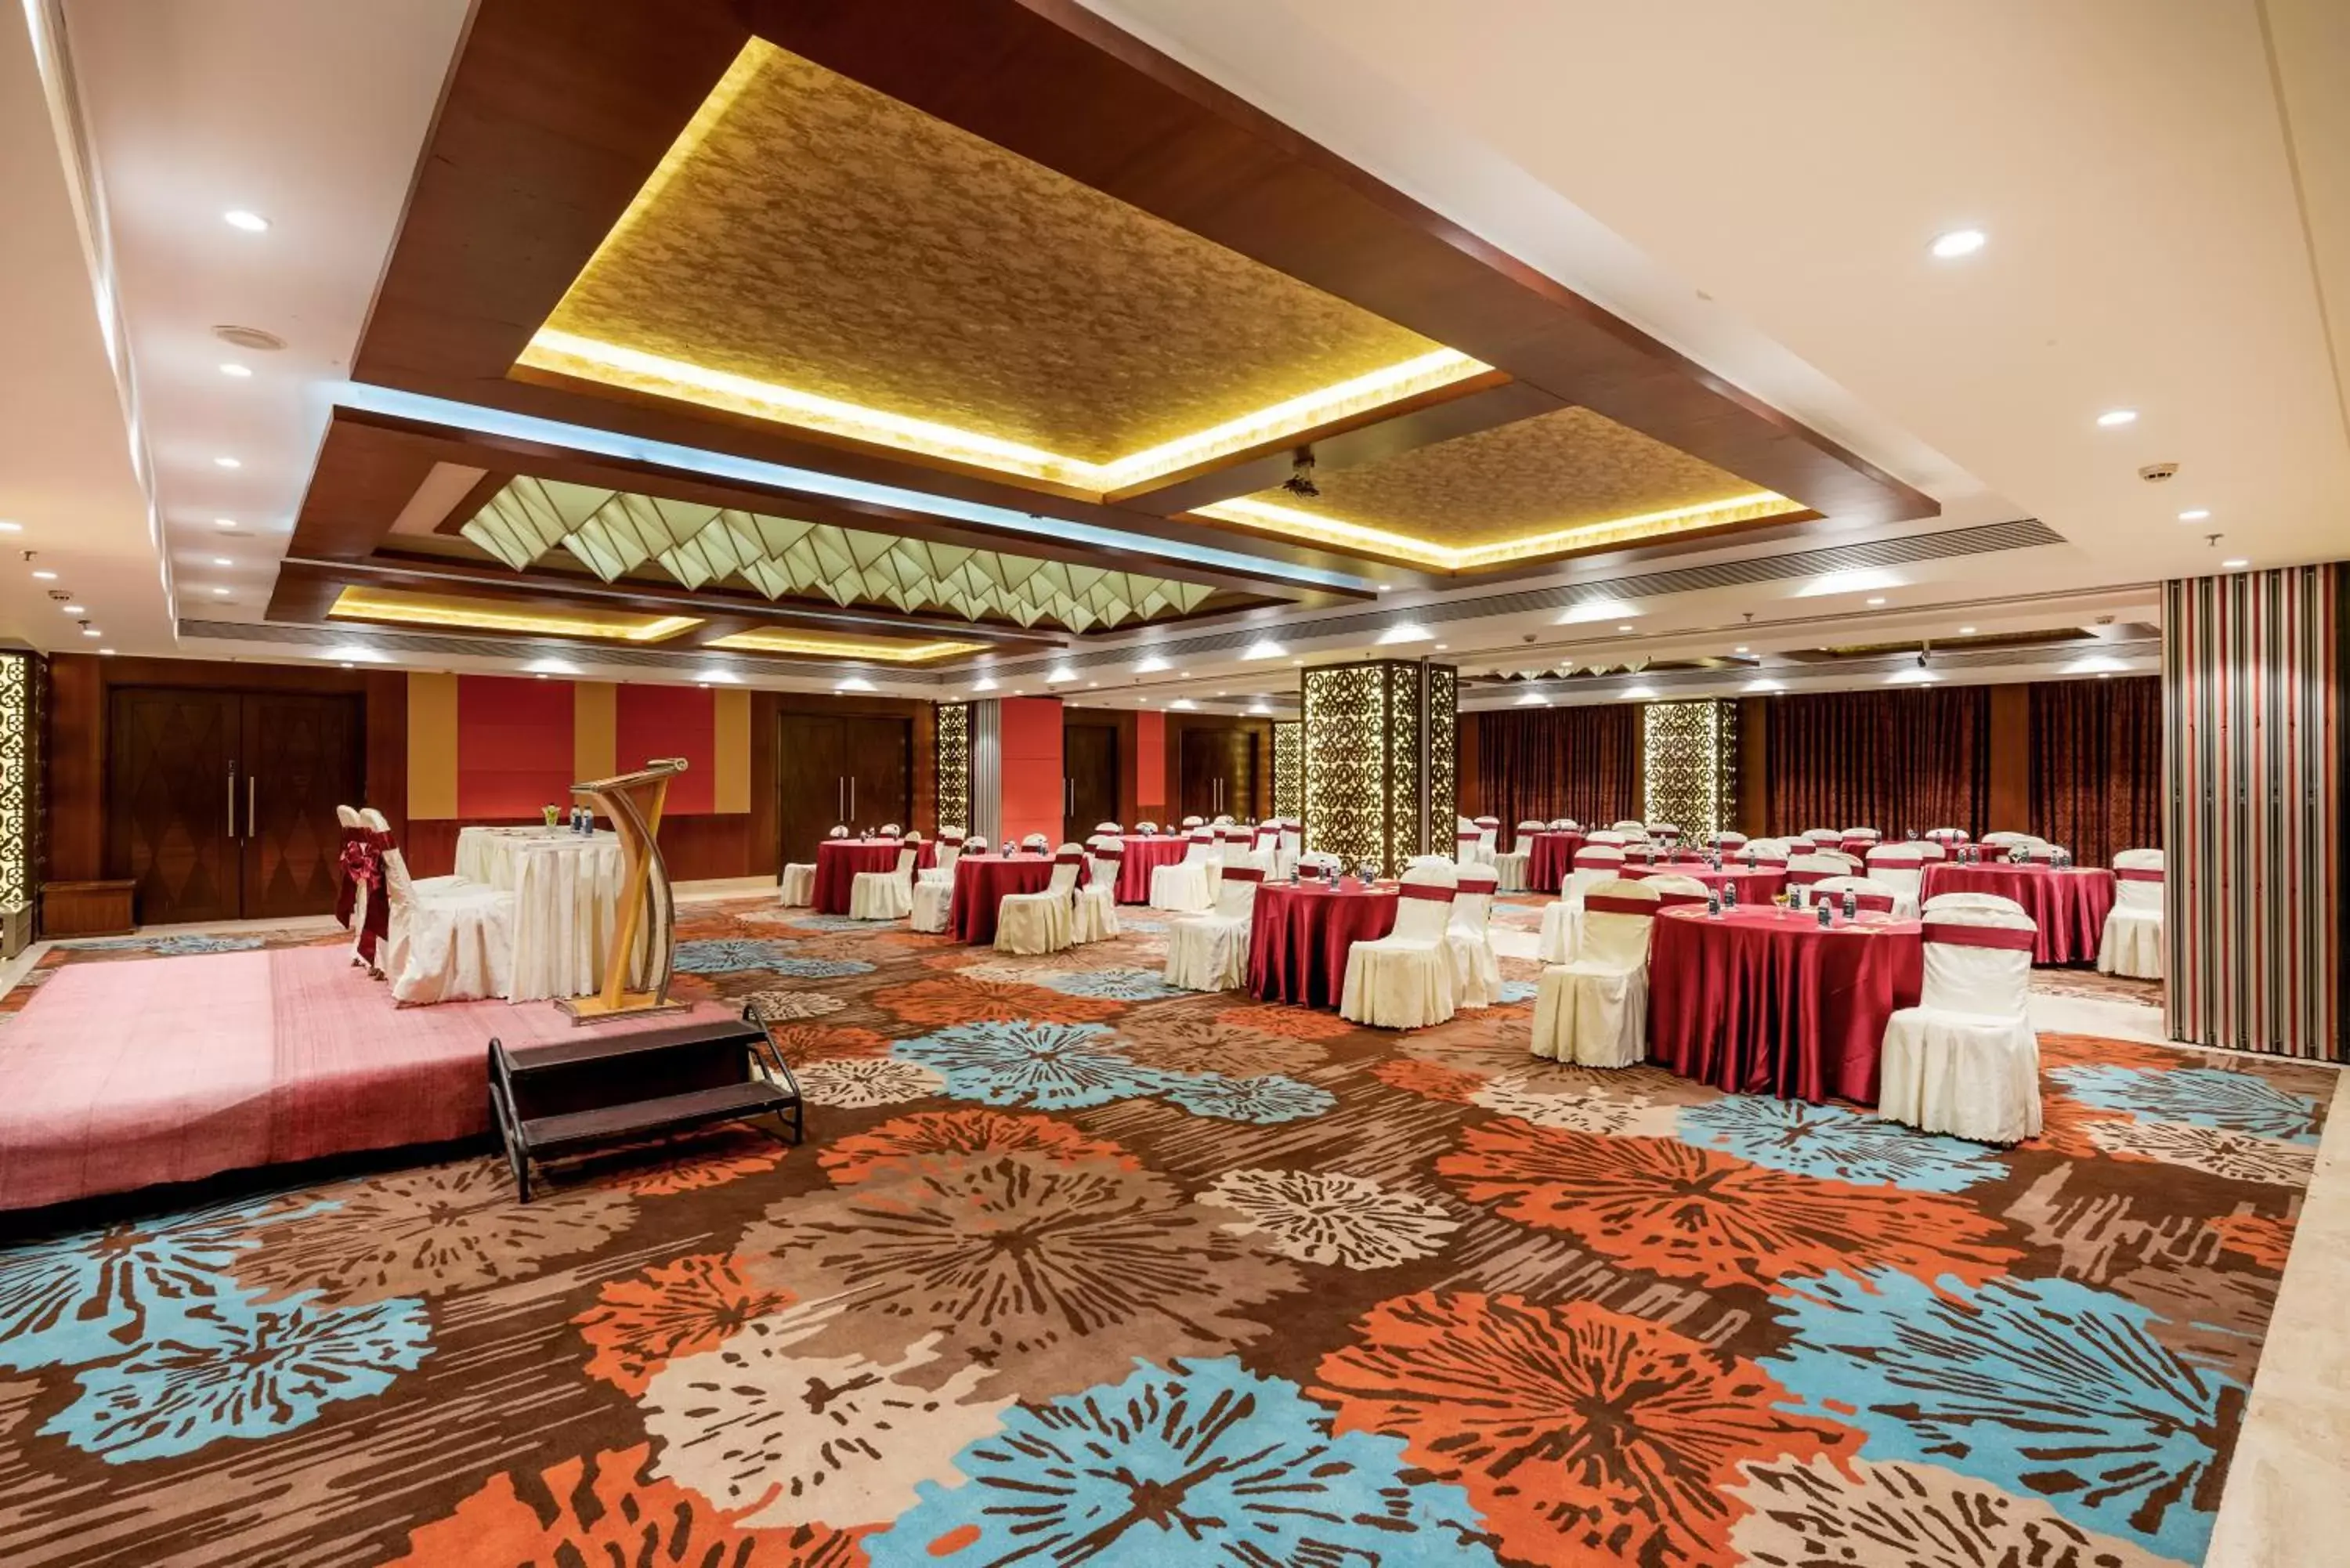 Banquet/Function facilities, Banquet Facilities in Express Inn The Business Luxury Hotel